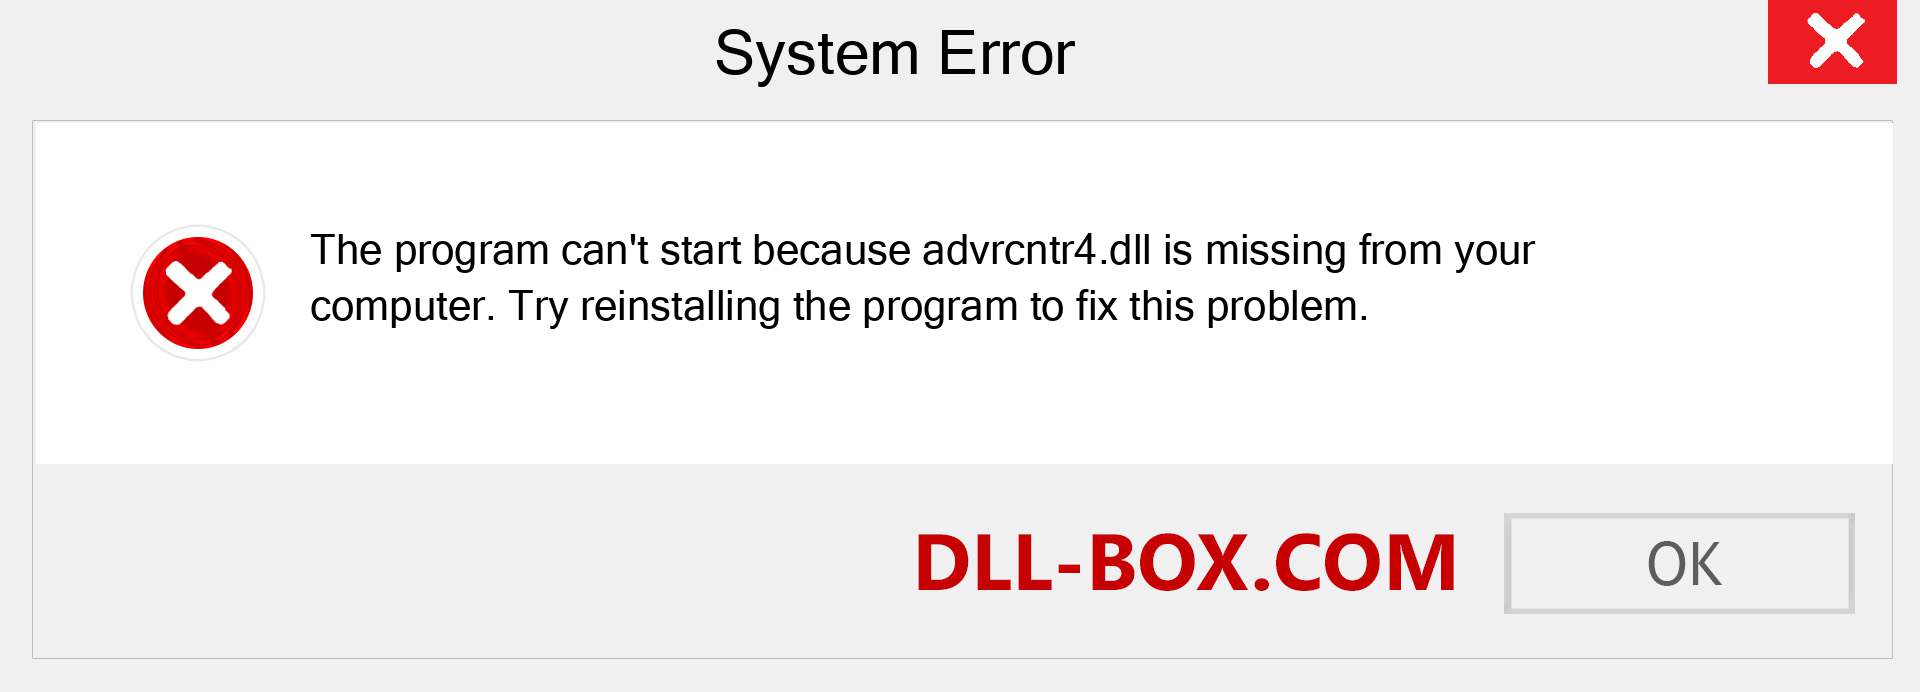  advrcntr4.dll file is missing?. Download for Windows 7, 8, 10 - Fix  advrcntr4 dll Missing Error on Windows, photos, images